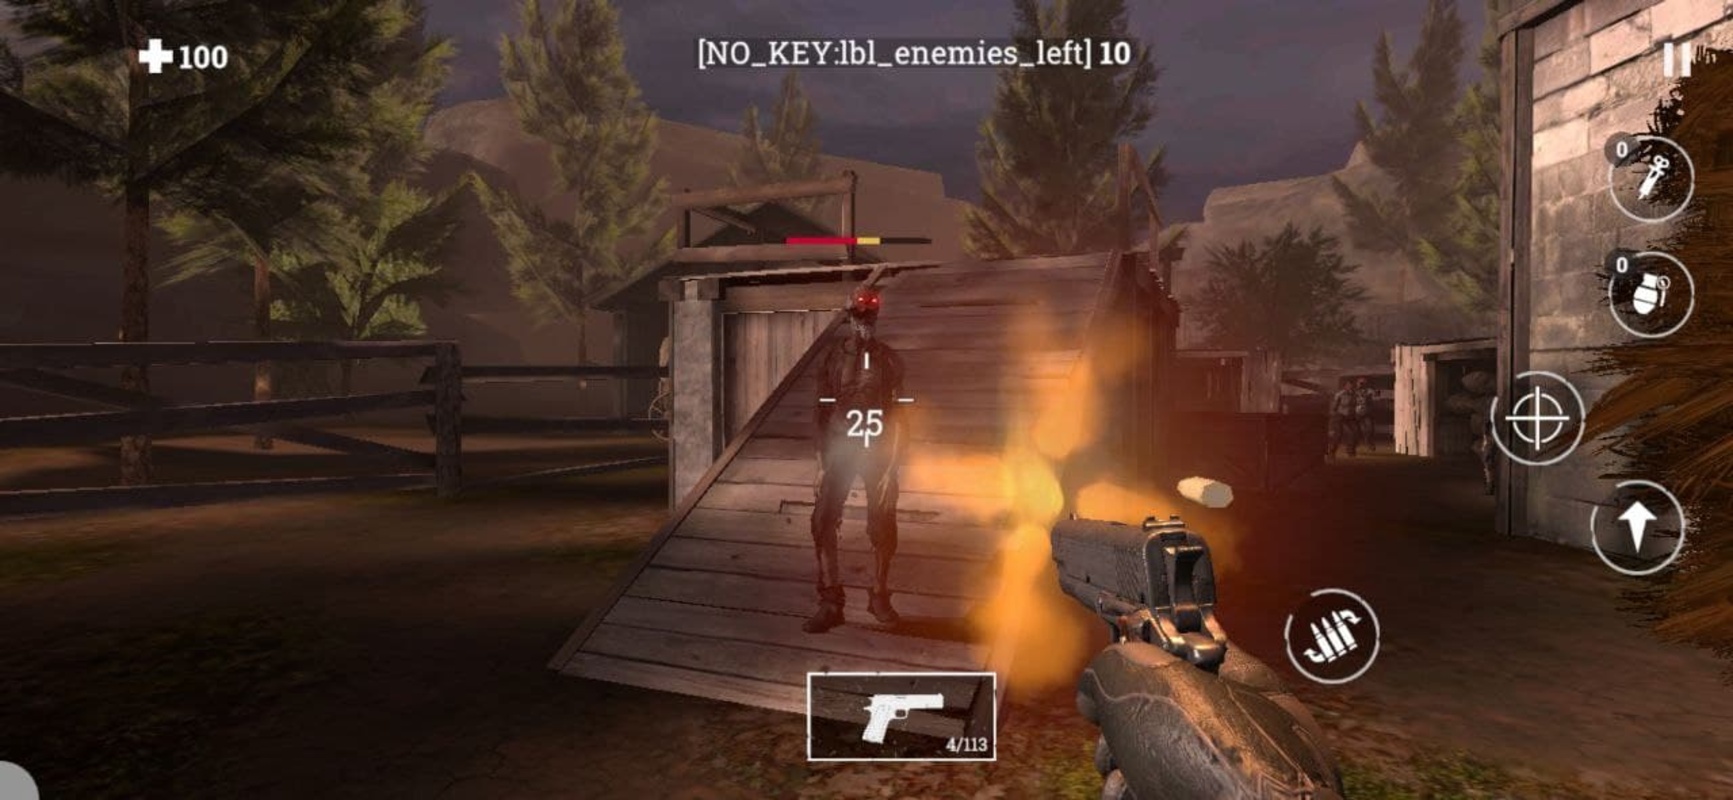 Crossfire: Survival Zombie Shooter 1.0.8 APK for Android Screenshot 4